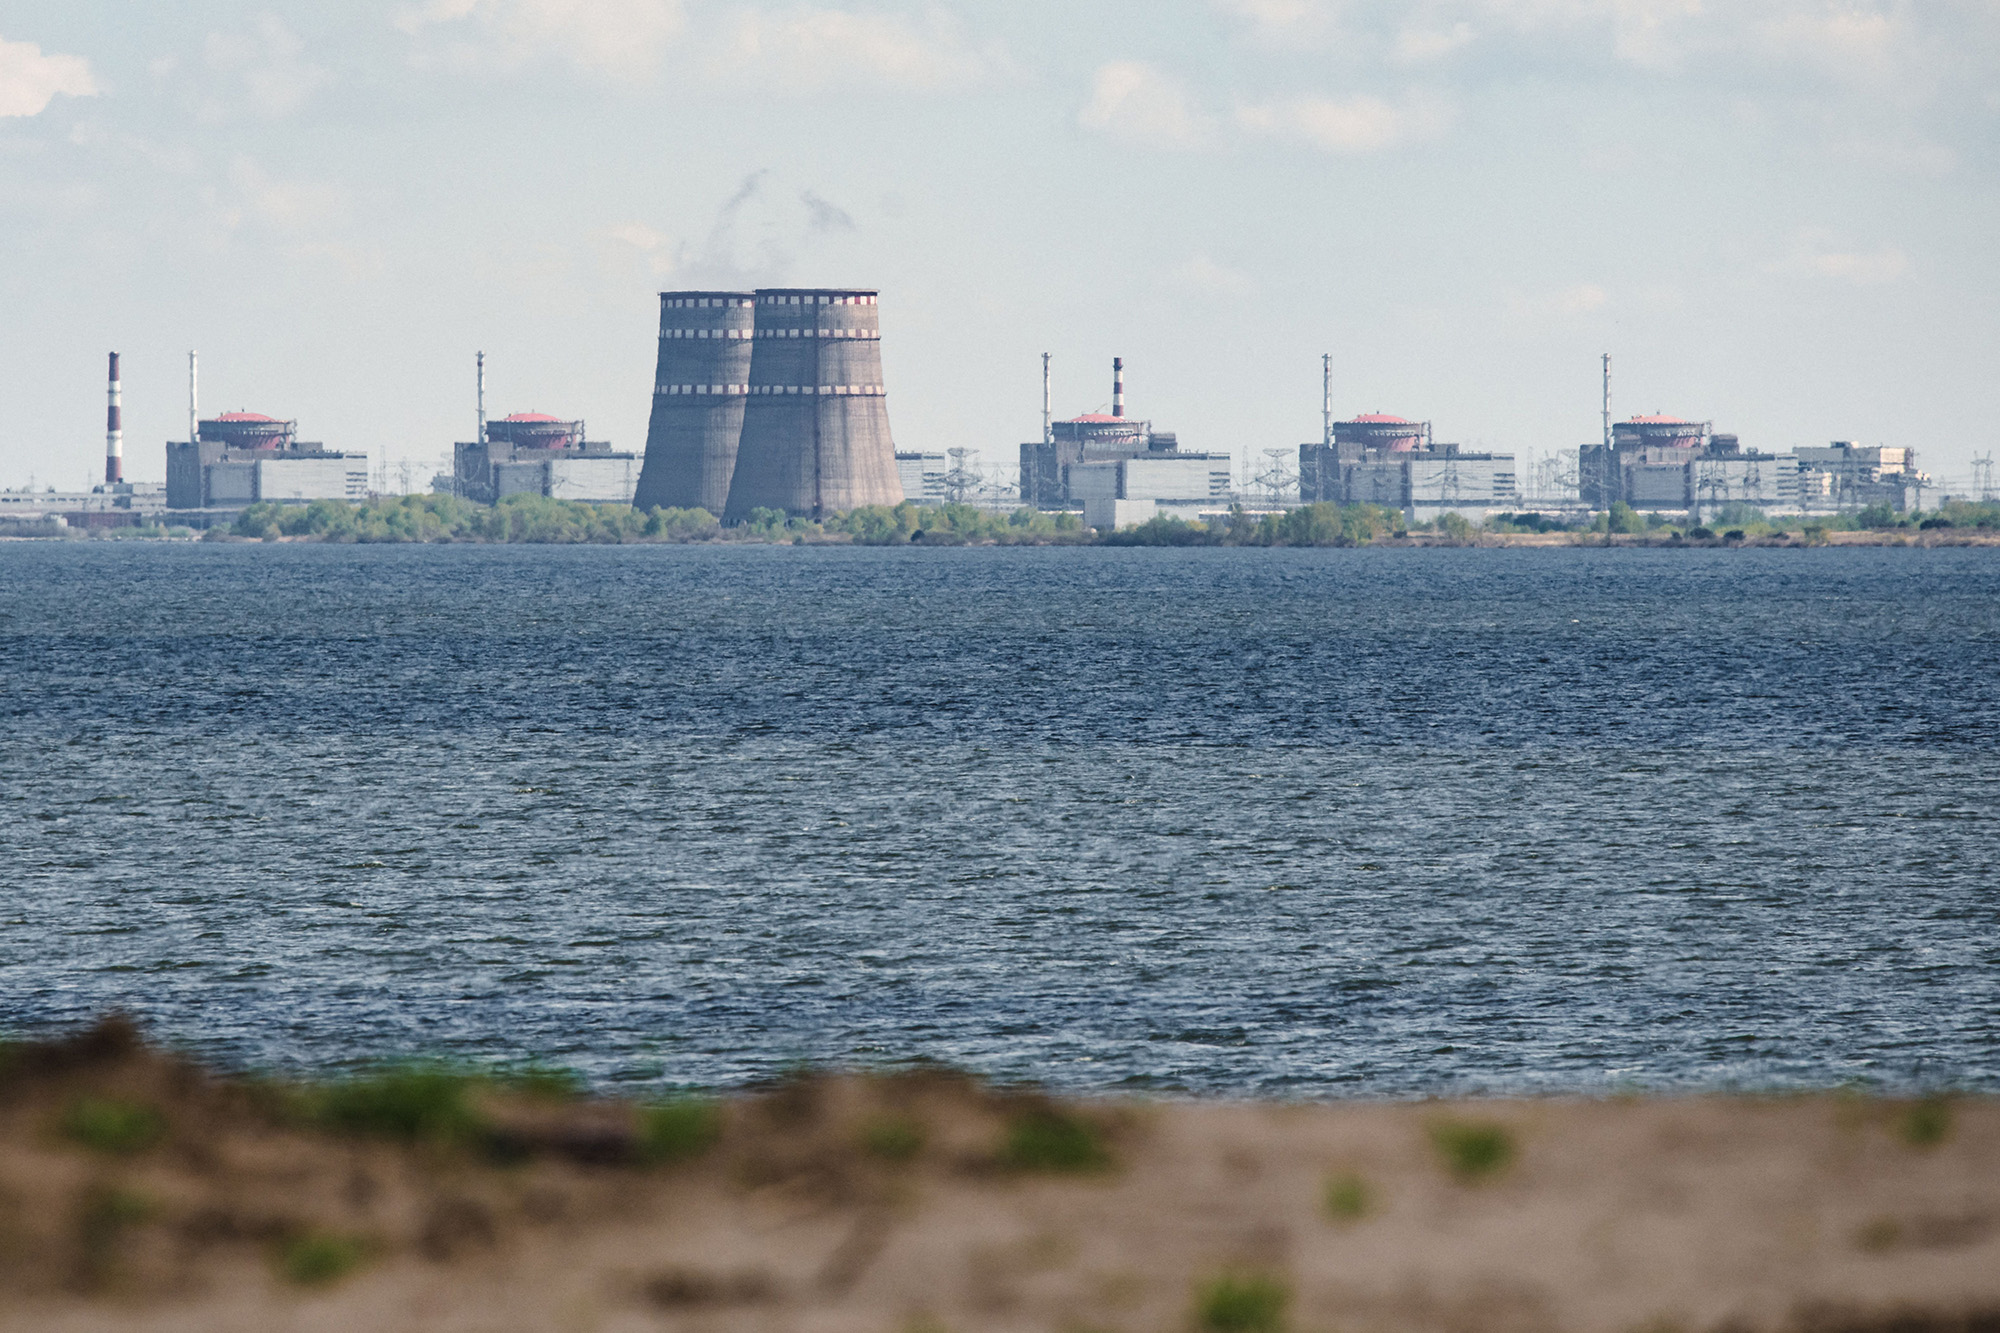 Ukraine is considering shutting down Zaporizhzhia nuclear power plant, chief nuclear inspector says